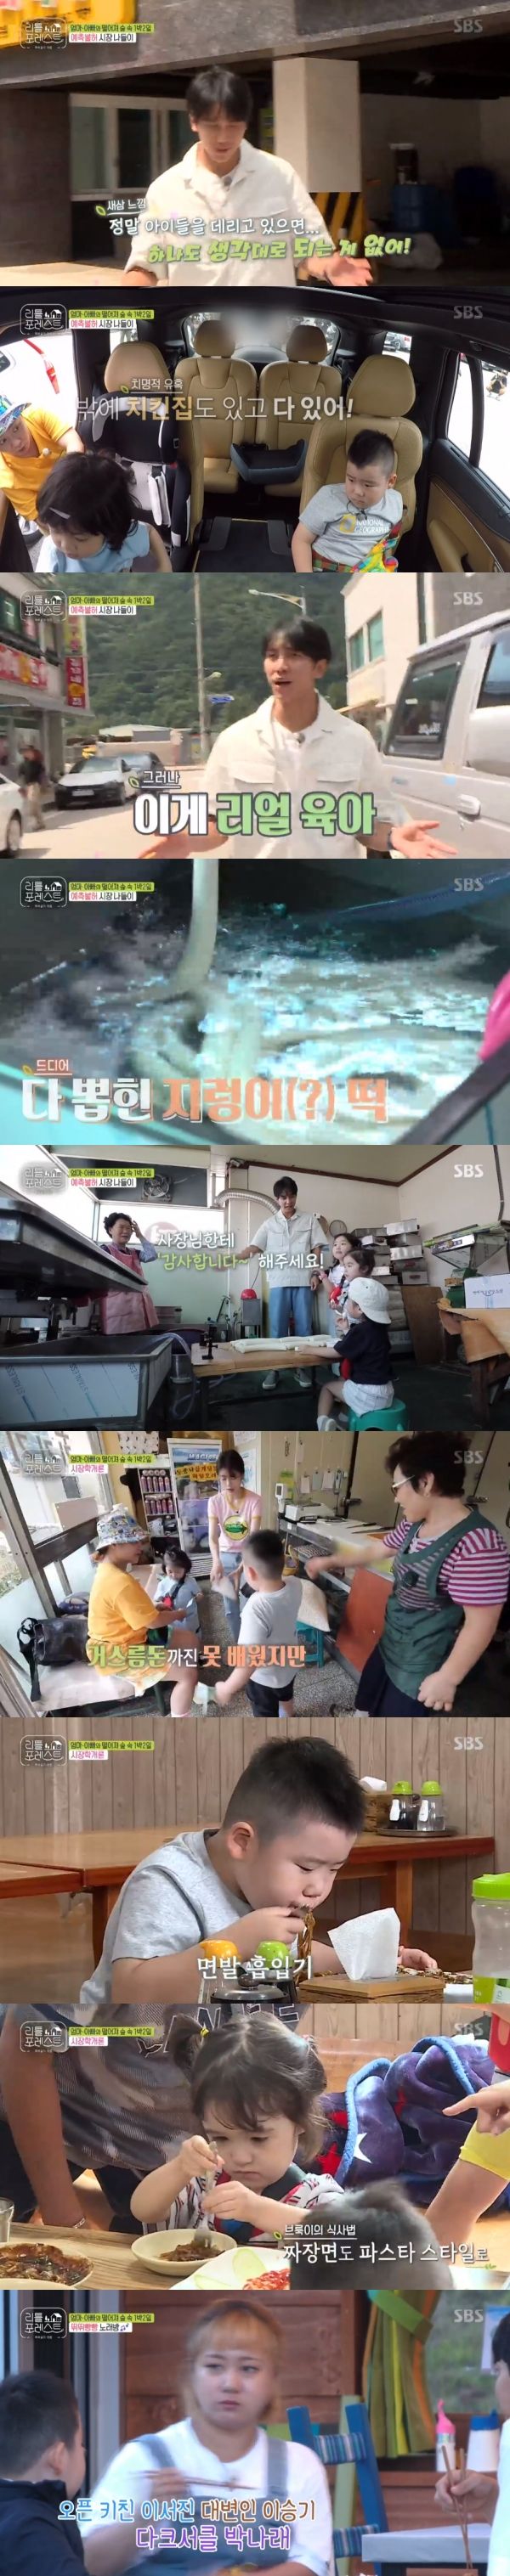 Lee Seo-jin and Lee Seung-gi have been sweating with real parenting.On the 17th, SBS Little Forest: Summer of the Blossom (hereinafter referred to as Little Forest) featured Lee Seo-jin, Lee Seung-gi, Park Na-rae, Jung So-min and Little Lee who went out to the Blossom Market.On the show, Little fell asleep deeply in the car heading to the market. I was tired of treasure hunting with my aunt, The Uncle.Lee Seo-jin and Lee Seung-gi, who prepared for the market outing, were embarrassed.When he arrived at his destination, Park Na-rae woke up a drunken Ehan, who led him out of the car saying there was something delicious in the market.As soon as he got off, Lee said, I want to eat chicken legs. Lee laughed at Choices and laughed more than sleep.With Choices behind, Lee Seo-jin and Lee Seung-gi decided that tired Little will not be able to watch the market.Lee Seo-jin first suggested lets go into the restaurant and lay it down and put it to bed, and Lee Seung-gi agreed, If youre tired, youre sober.Lee Seung-gi, who went to the restaurant, said, If you have children, there is nothing that you think about.Lee Seung-gi, who found a suitable store to put Littles to bed, asked for his understanding and laughed at Lee Seo-jin saying, Do not go out next time.Without a break, Lee Seung-gi started the Littles market outing.Lee Seung-gi, who entered the rice cake house, asked the little people who watched the rice cake, Have you ever seen this rice cake? Brooke smiled with a pure answer, Its a worm.On the other hand, Gaon said, I really like rice cake.When Lee Seung-gi asked What taste is it? To Gaon, who tasted it, Gaoni laughed with an honest answer saying rice cake taste.Lee Seung-gi offered Grace a honey that she hated rice cakes, and Grace caught her eye with a delicious look of waiting.Meanwhile, Littley, who had one hot dog in hand, picked up a gift from Lee Seo-jin, who said firmly that the Littleys, who saw the glitter skirt Lee Seung-gi picked, were Princesss.Lee Seung-gi said, Is not it Missa Lee The Uncle Princess?Littles picked black pants, saying I feel sorry, but I could not buy it because of budget overruns.Little boys who ate from Lee Seung-gis preoccupied store to the jjajangmyeon started to make aunts, The Uncles and Songpyeon.Park Na-rae said, Songpyeon should be well made to have a pretty child. Lee Seung-gi laughed and Lee Seo-jin said, Youre going to have a son.Lee Han is the same son. Lee Seung-gi is adamantly daughter but added, Lee Han is good. Littleies tasted the songpyeon they owed themselves; Gaoni admired it as a rice cake jackpot.Its like a holiday family, said Jung So-min, who sat around together.Lee Seung-gi and Park Na-rae also added, This is a family, and I think I met longer than my family.